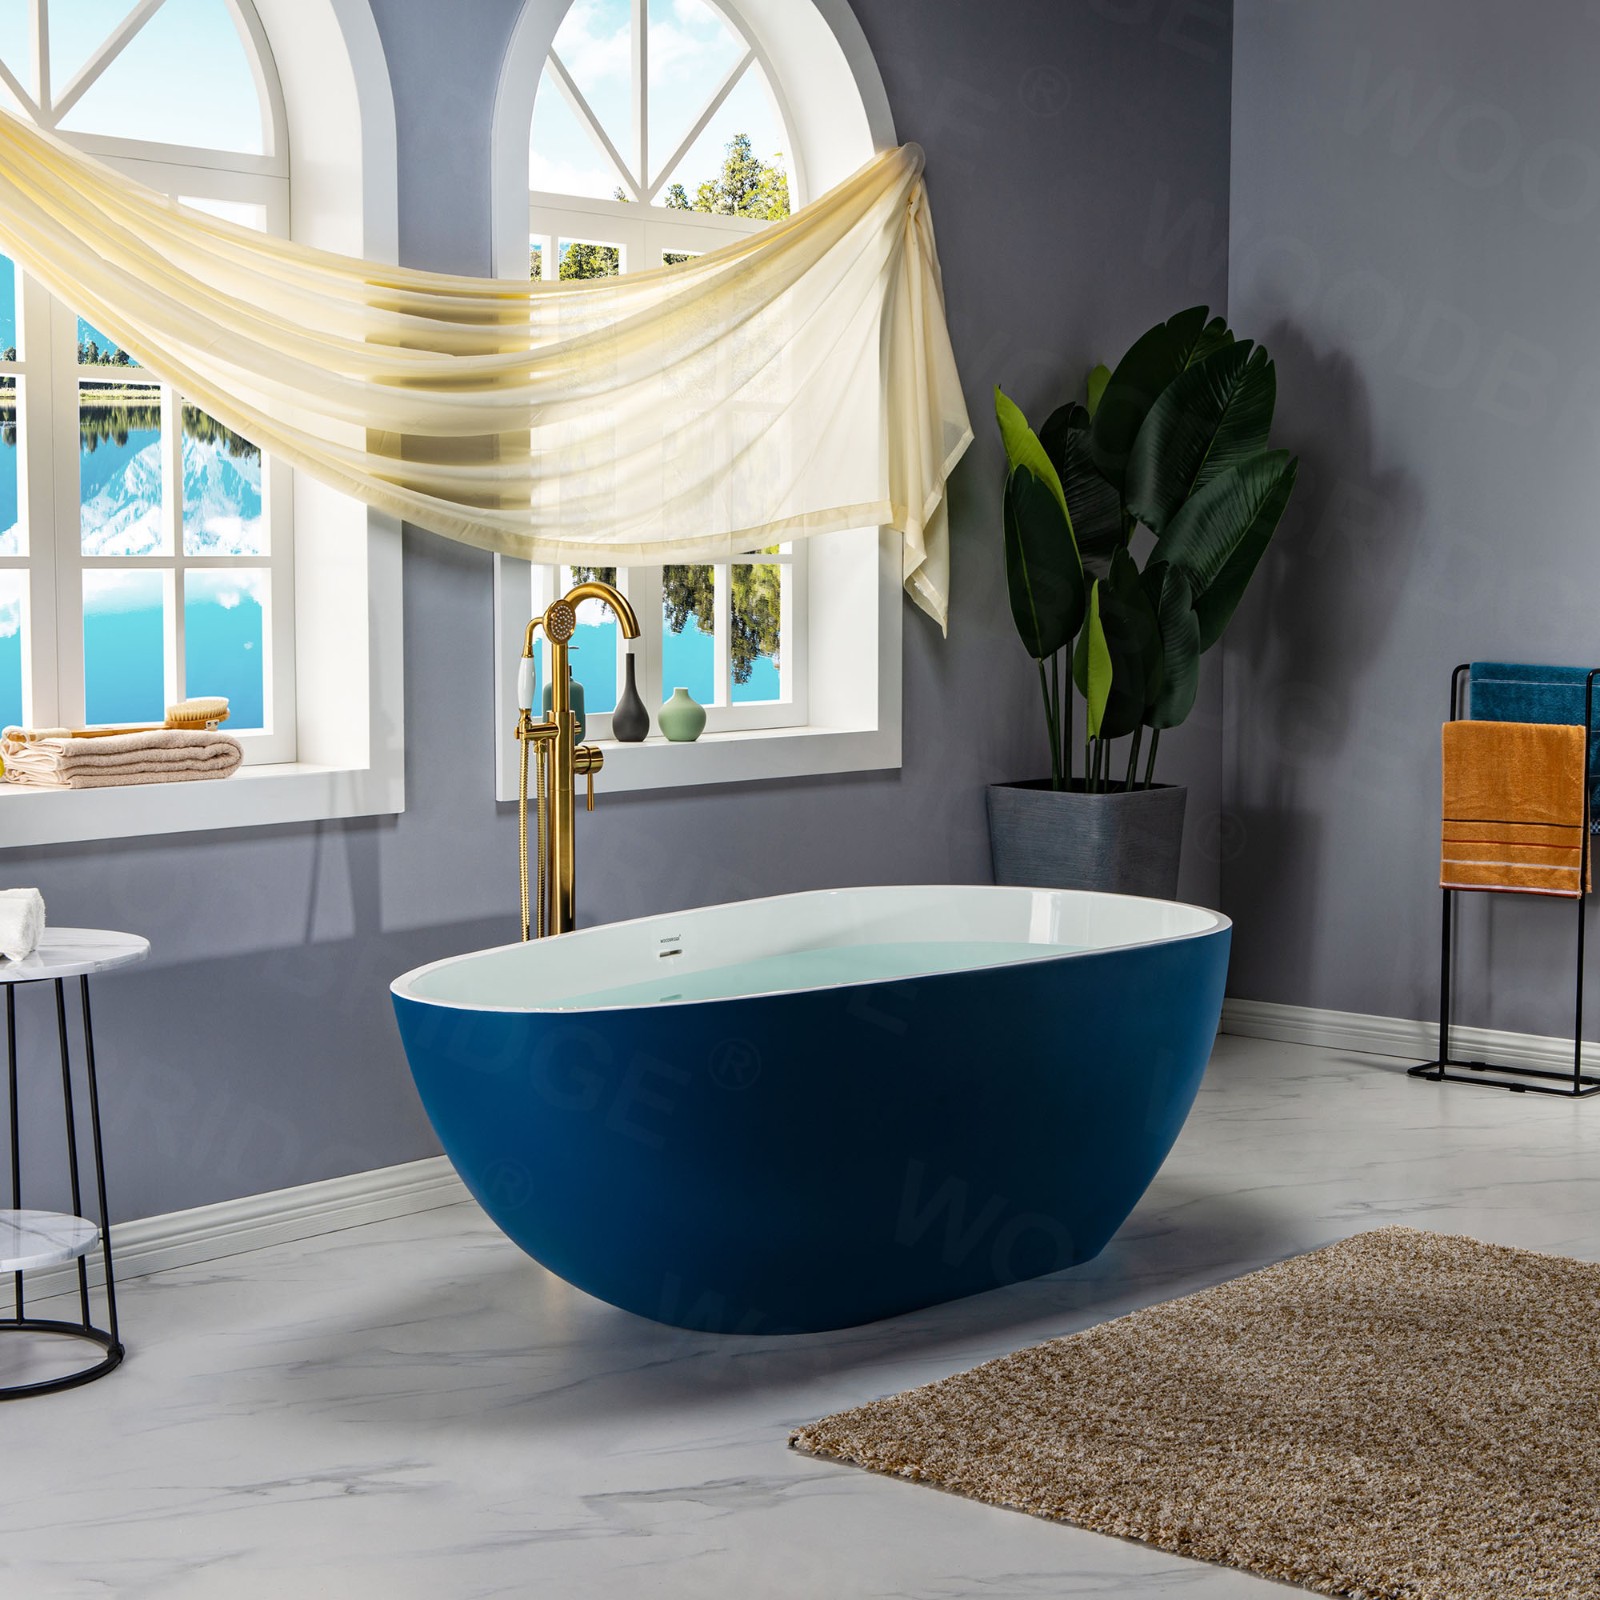  WOODBRIDGE 67 in. Freestanding Double Ended Solid Surface Soaking Bathtub with Center Drain Assembly and Overflow, BTA0053/BTA0053, Glossy White (Inside) Satin Blue (Outside)_8367